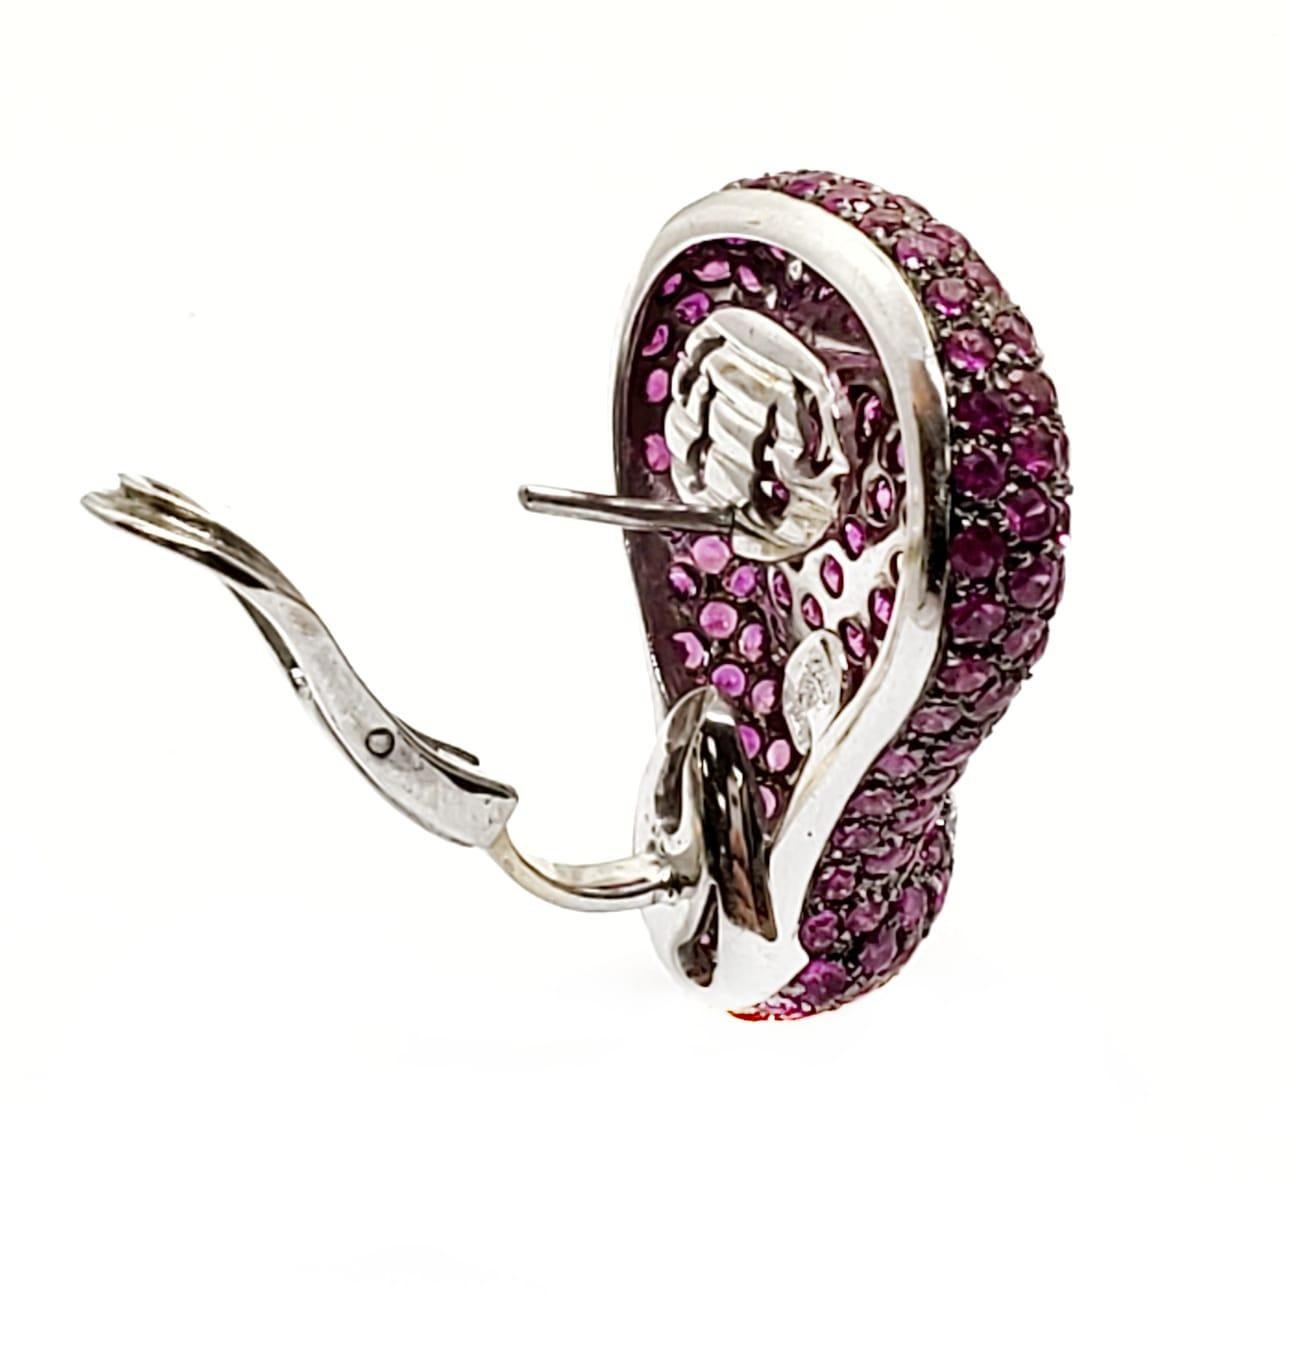 Round Cut Andreoli Pink Sapphire Diamond on Ear Clip Earrings 18 Karat Gold Blackened For Sale